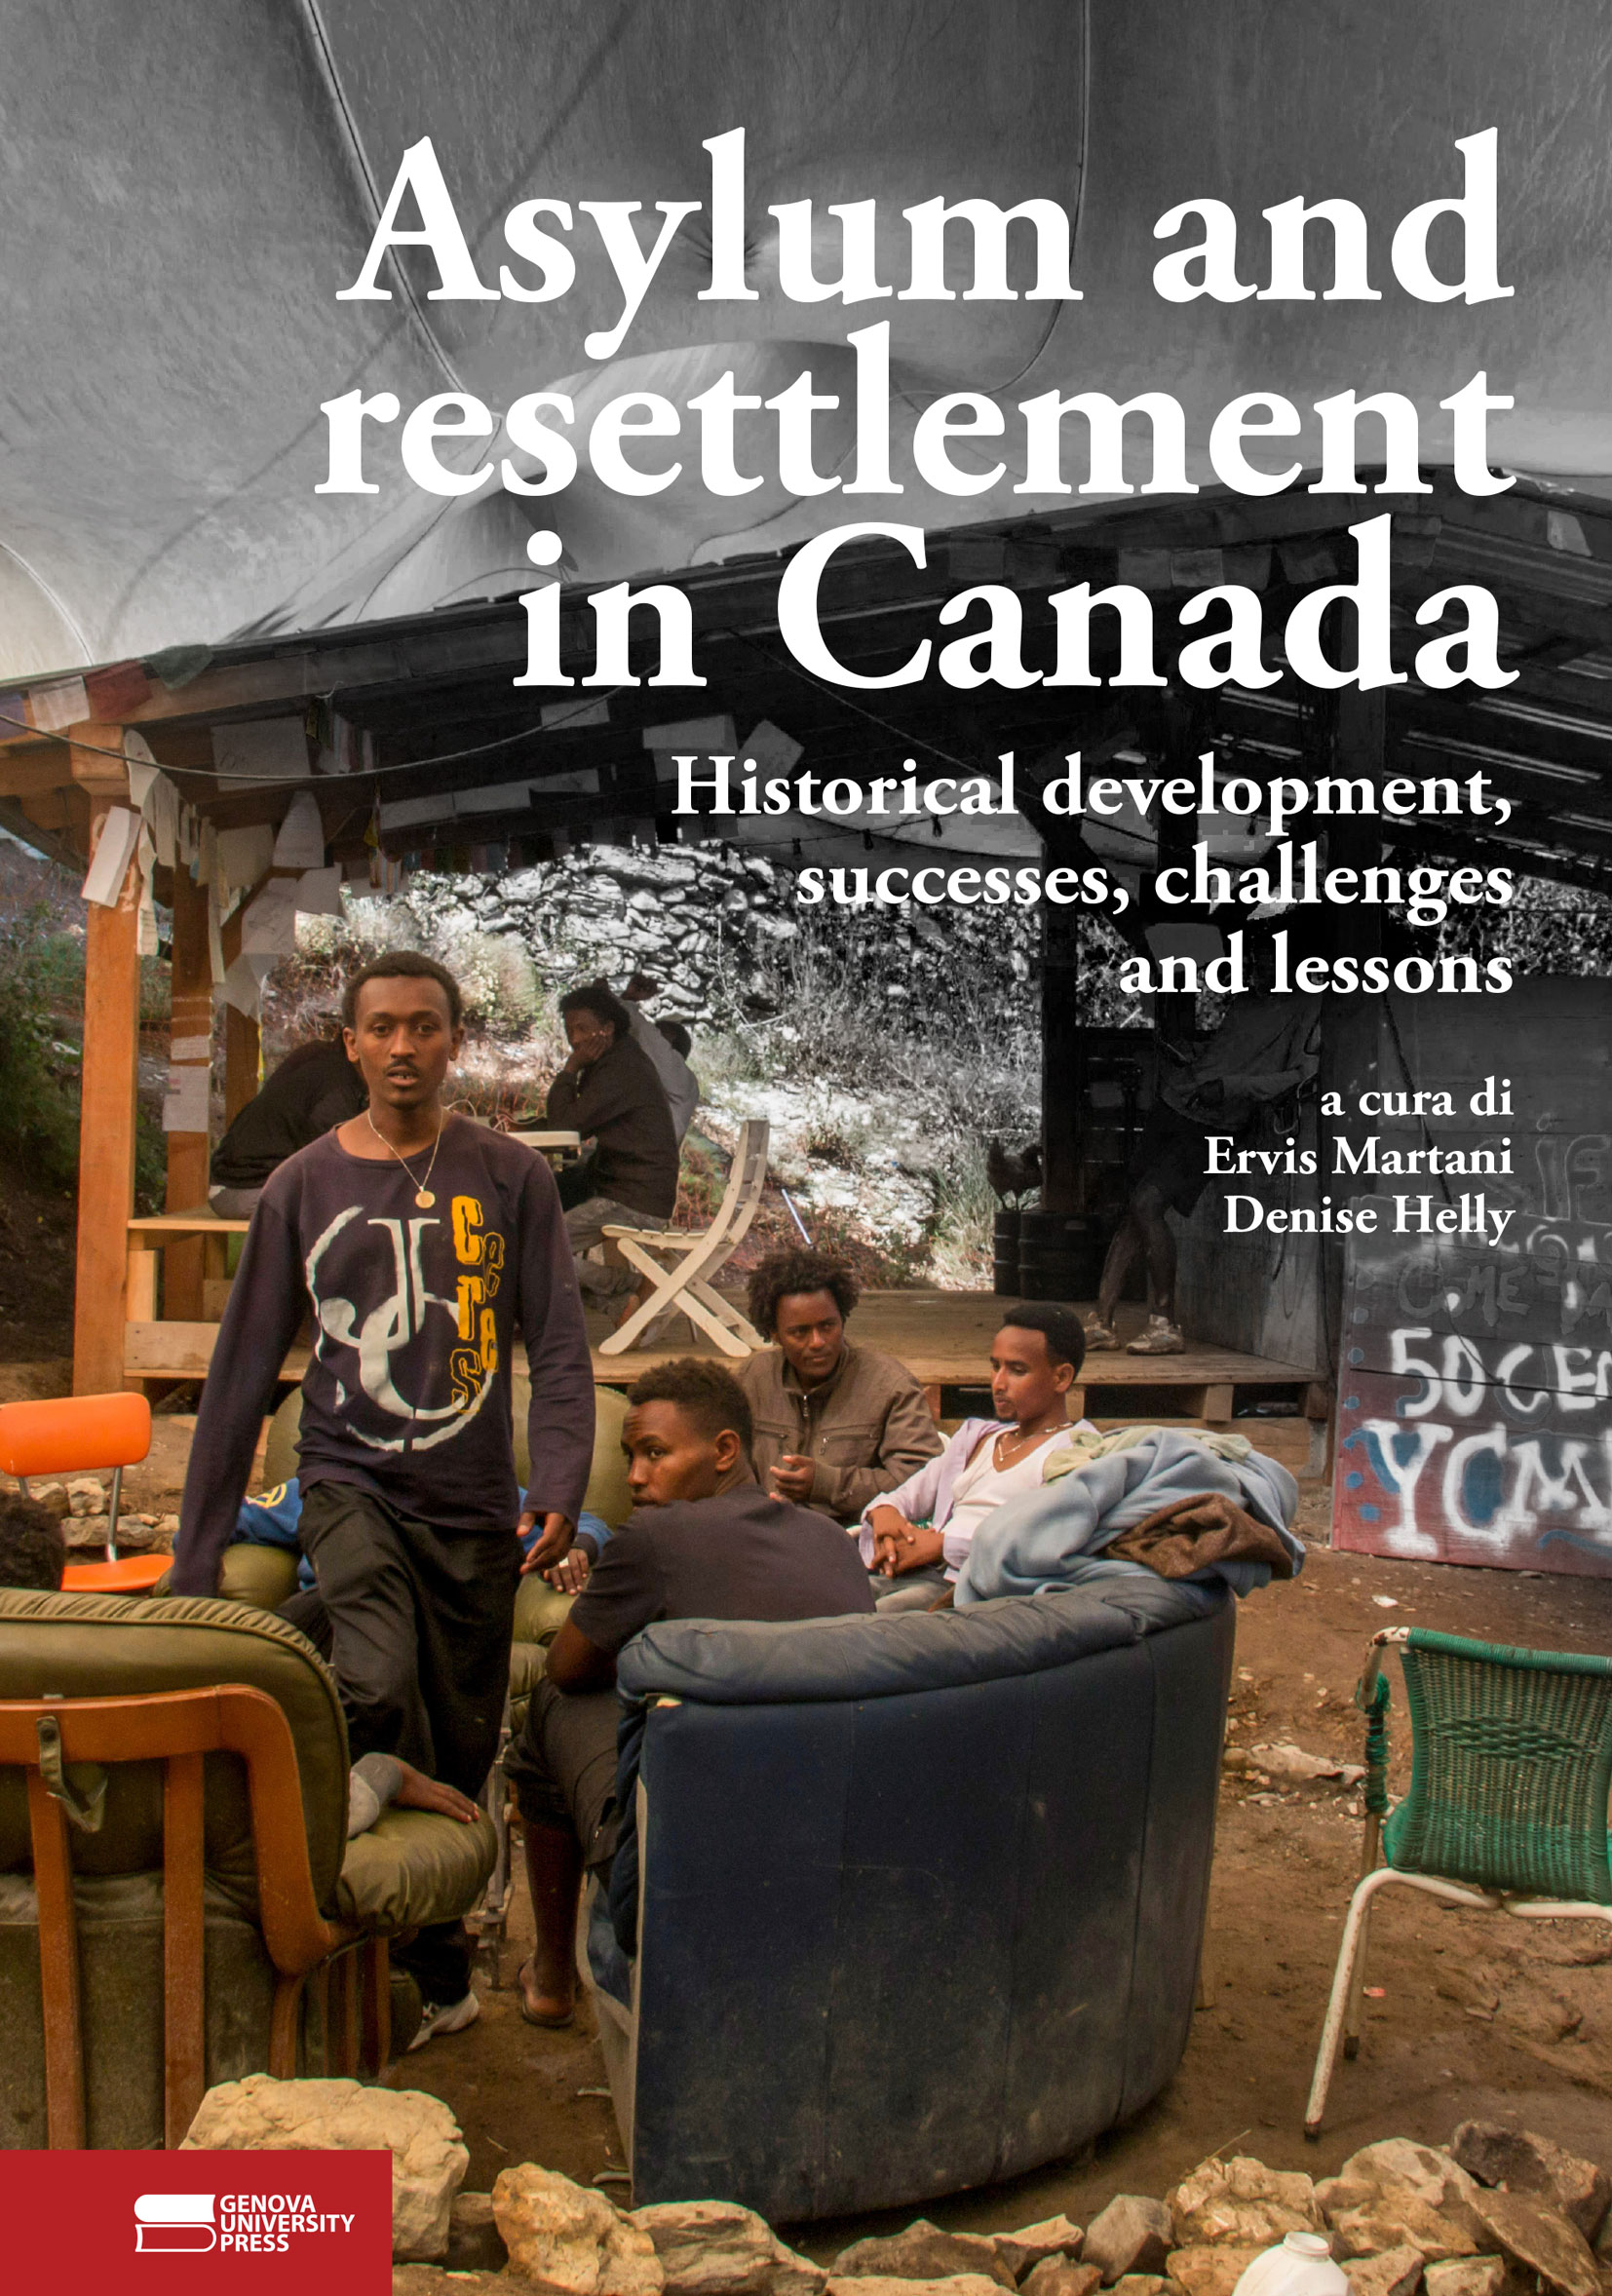 Asylum and resettlement in Canada